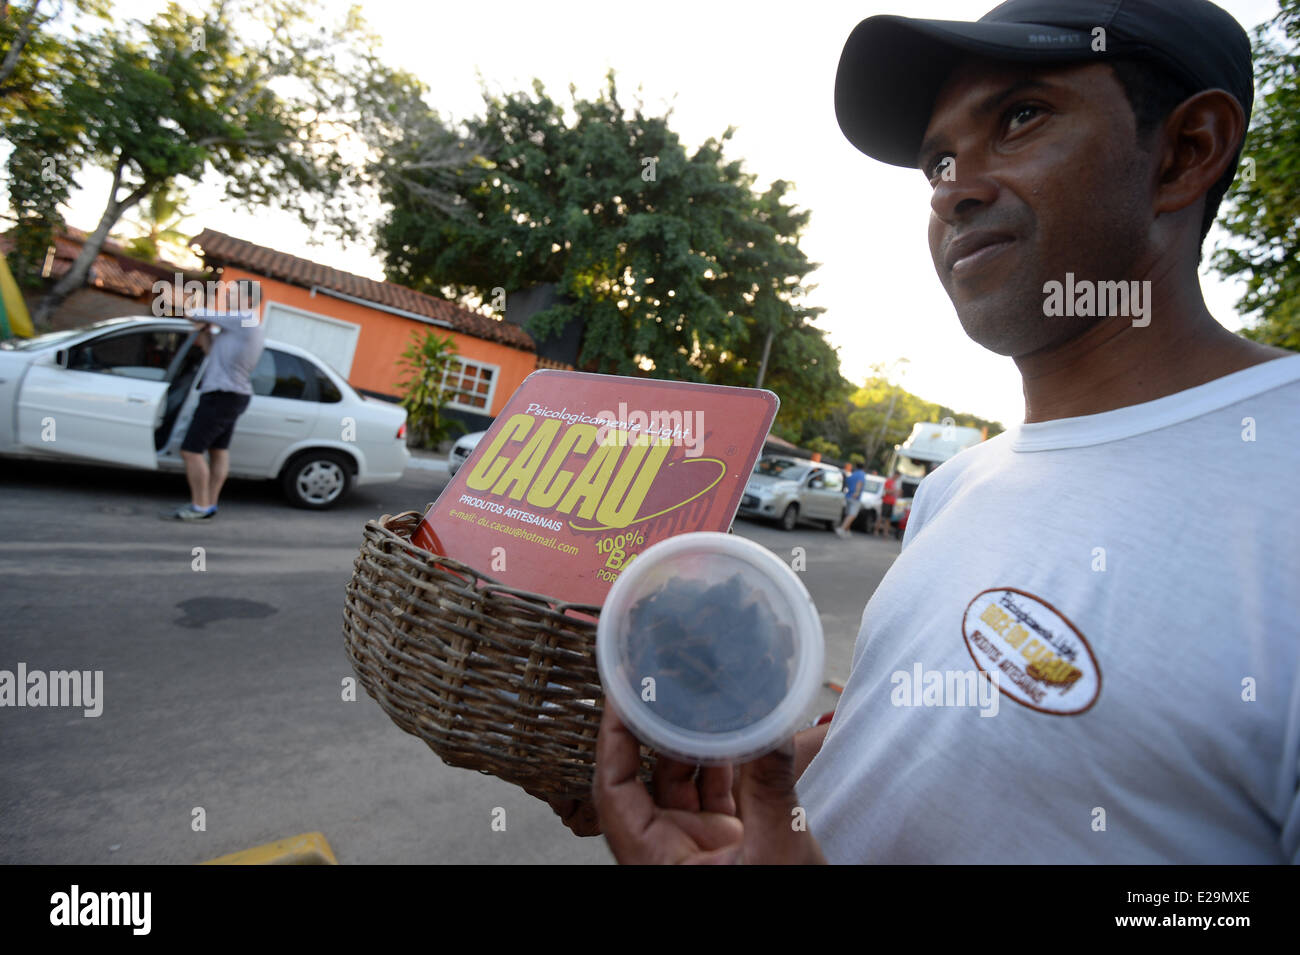 Santo Andre, Brasil. 09th June, 2014. A street vendor sells chocolate near the team hotel of the German national soccer team in Santo Andre, Brasil, 09 June 2014. The FIFA World Cup 2014 will take place in Brazil from 12 June to 13 July 2014.Photo: Andreas Gebert/dpa/Alamy Live News Stock Photo